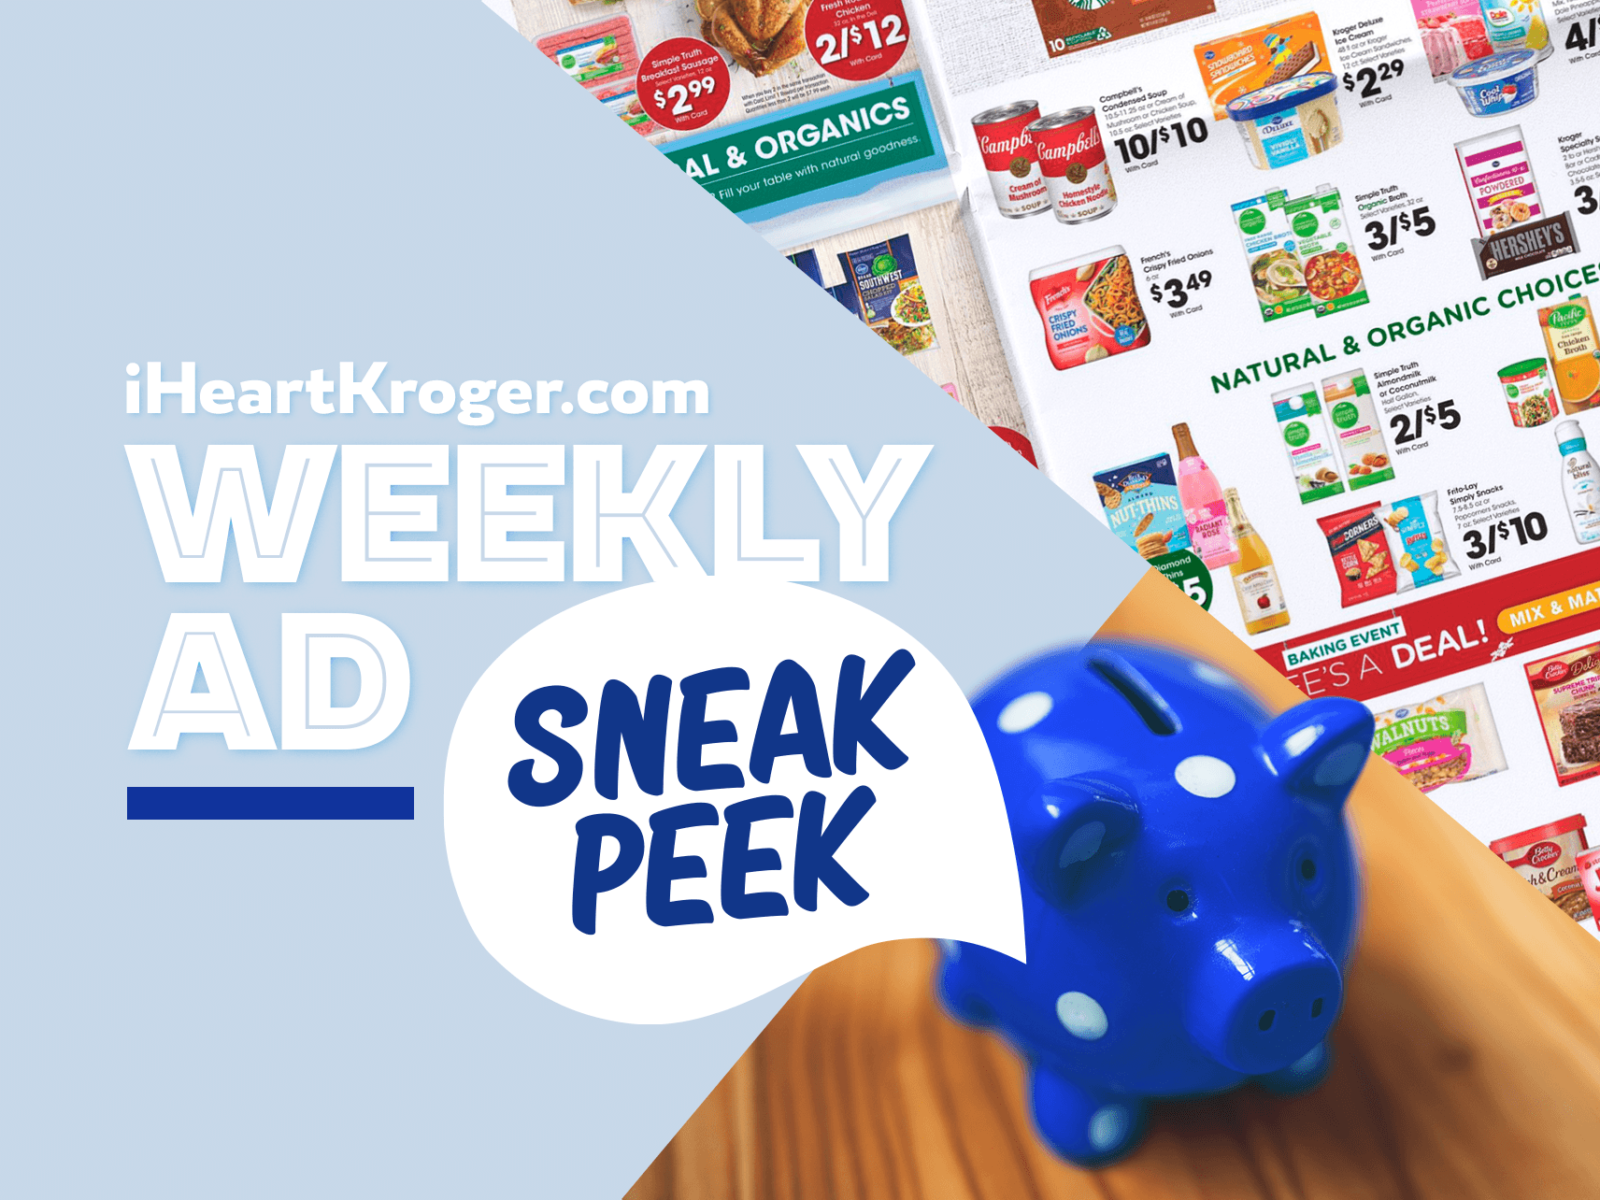 Kroger Ad & Coupons Week Of 12/21 to 12/27